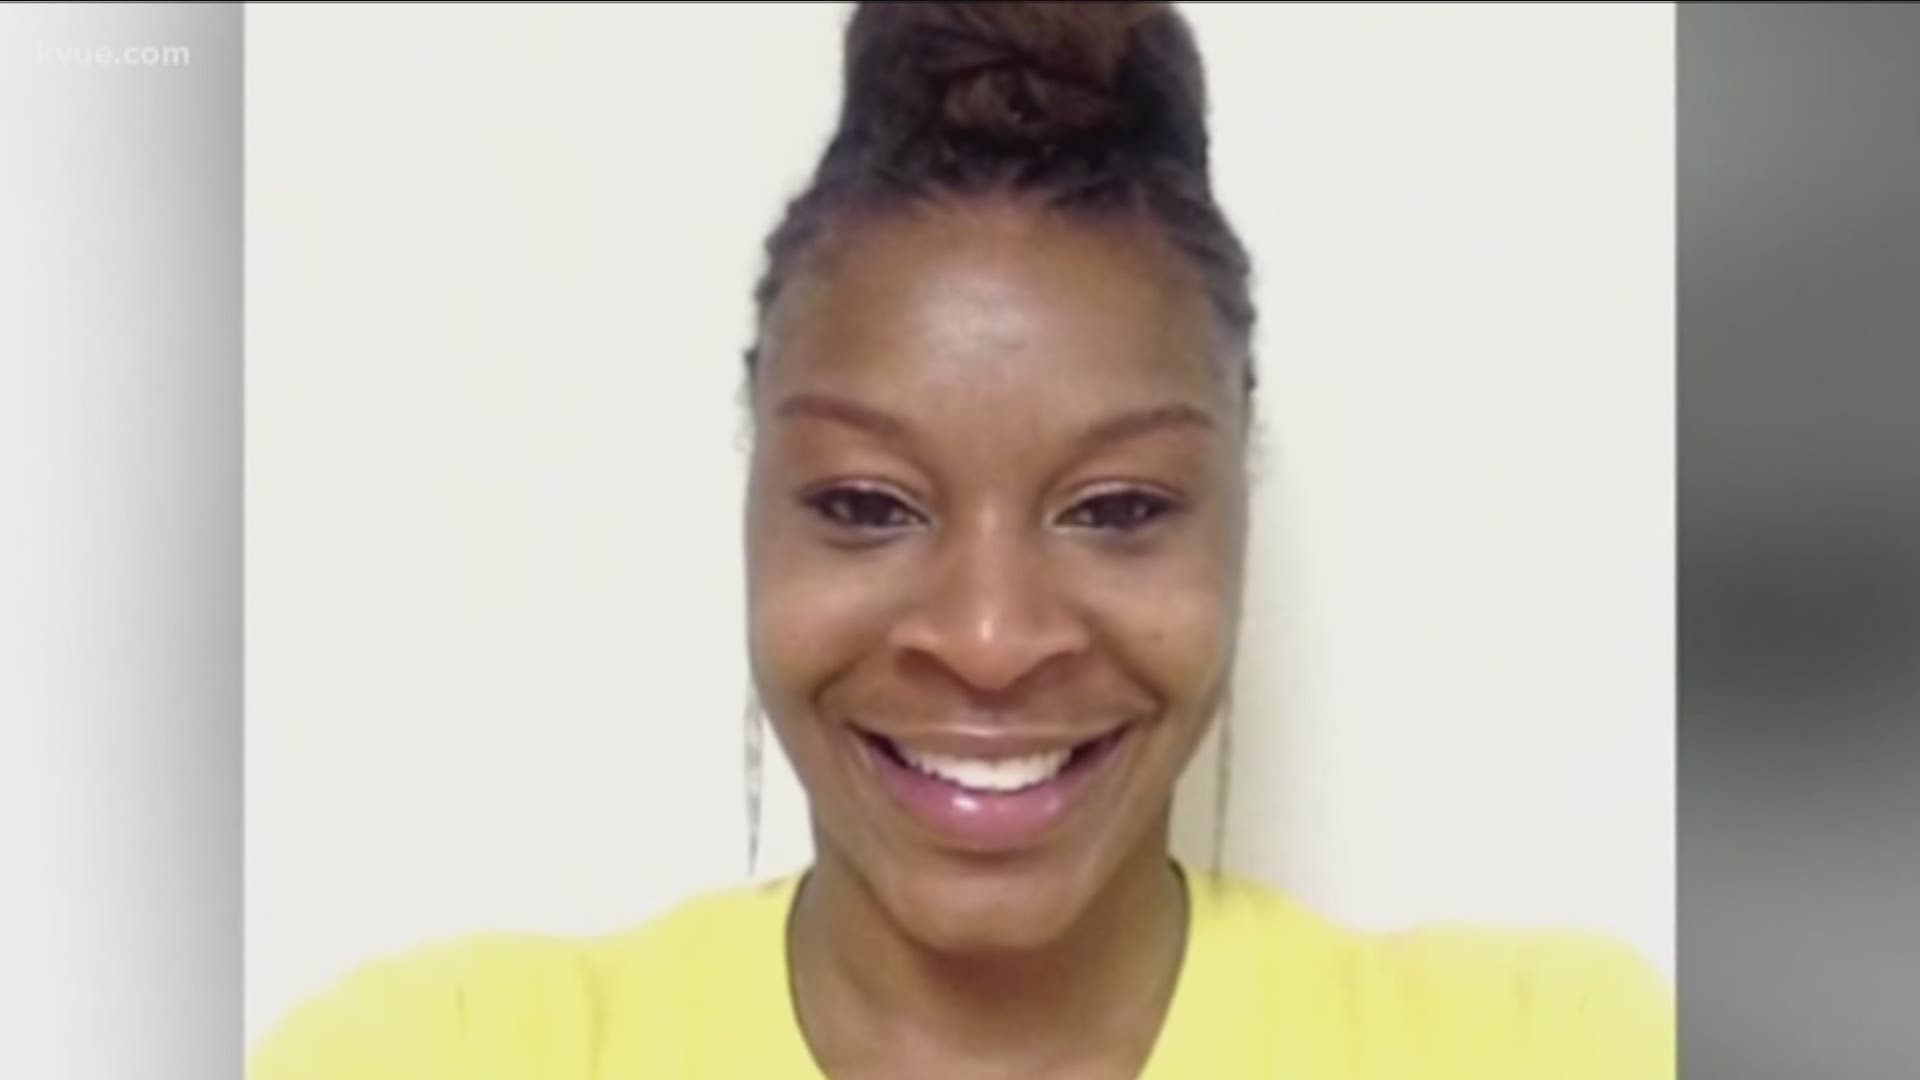 Austin will honor Sandra Bland, a Texas woman whose death in a jail cell sparked outrage nationwide.